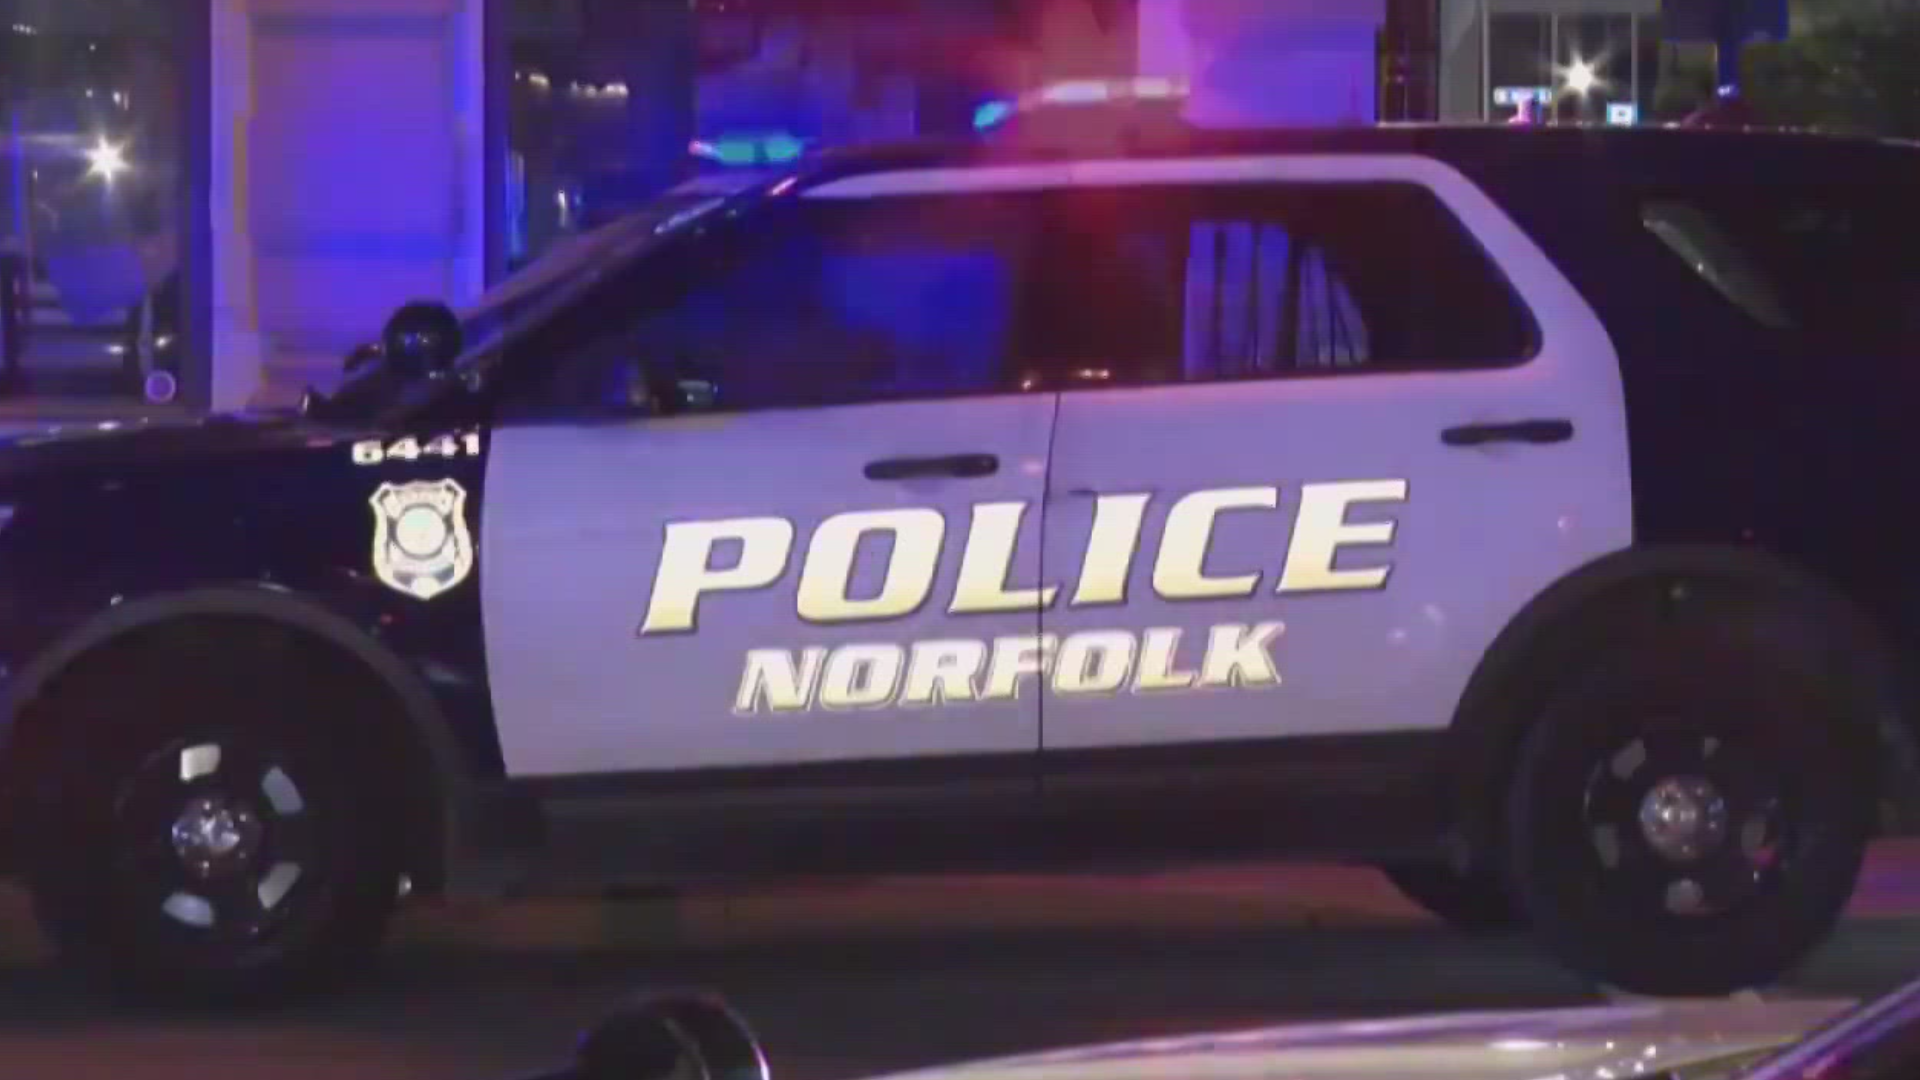 Norfolk's city manager did not violate any rules when appointing Mark Talbot as the next chief of police, according to an investigation by the city auditor's office.